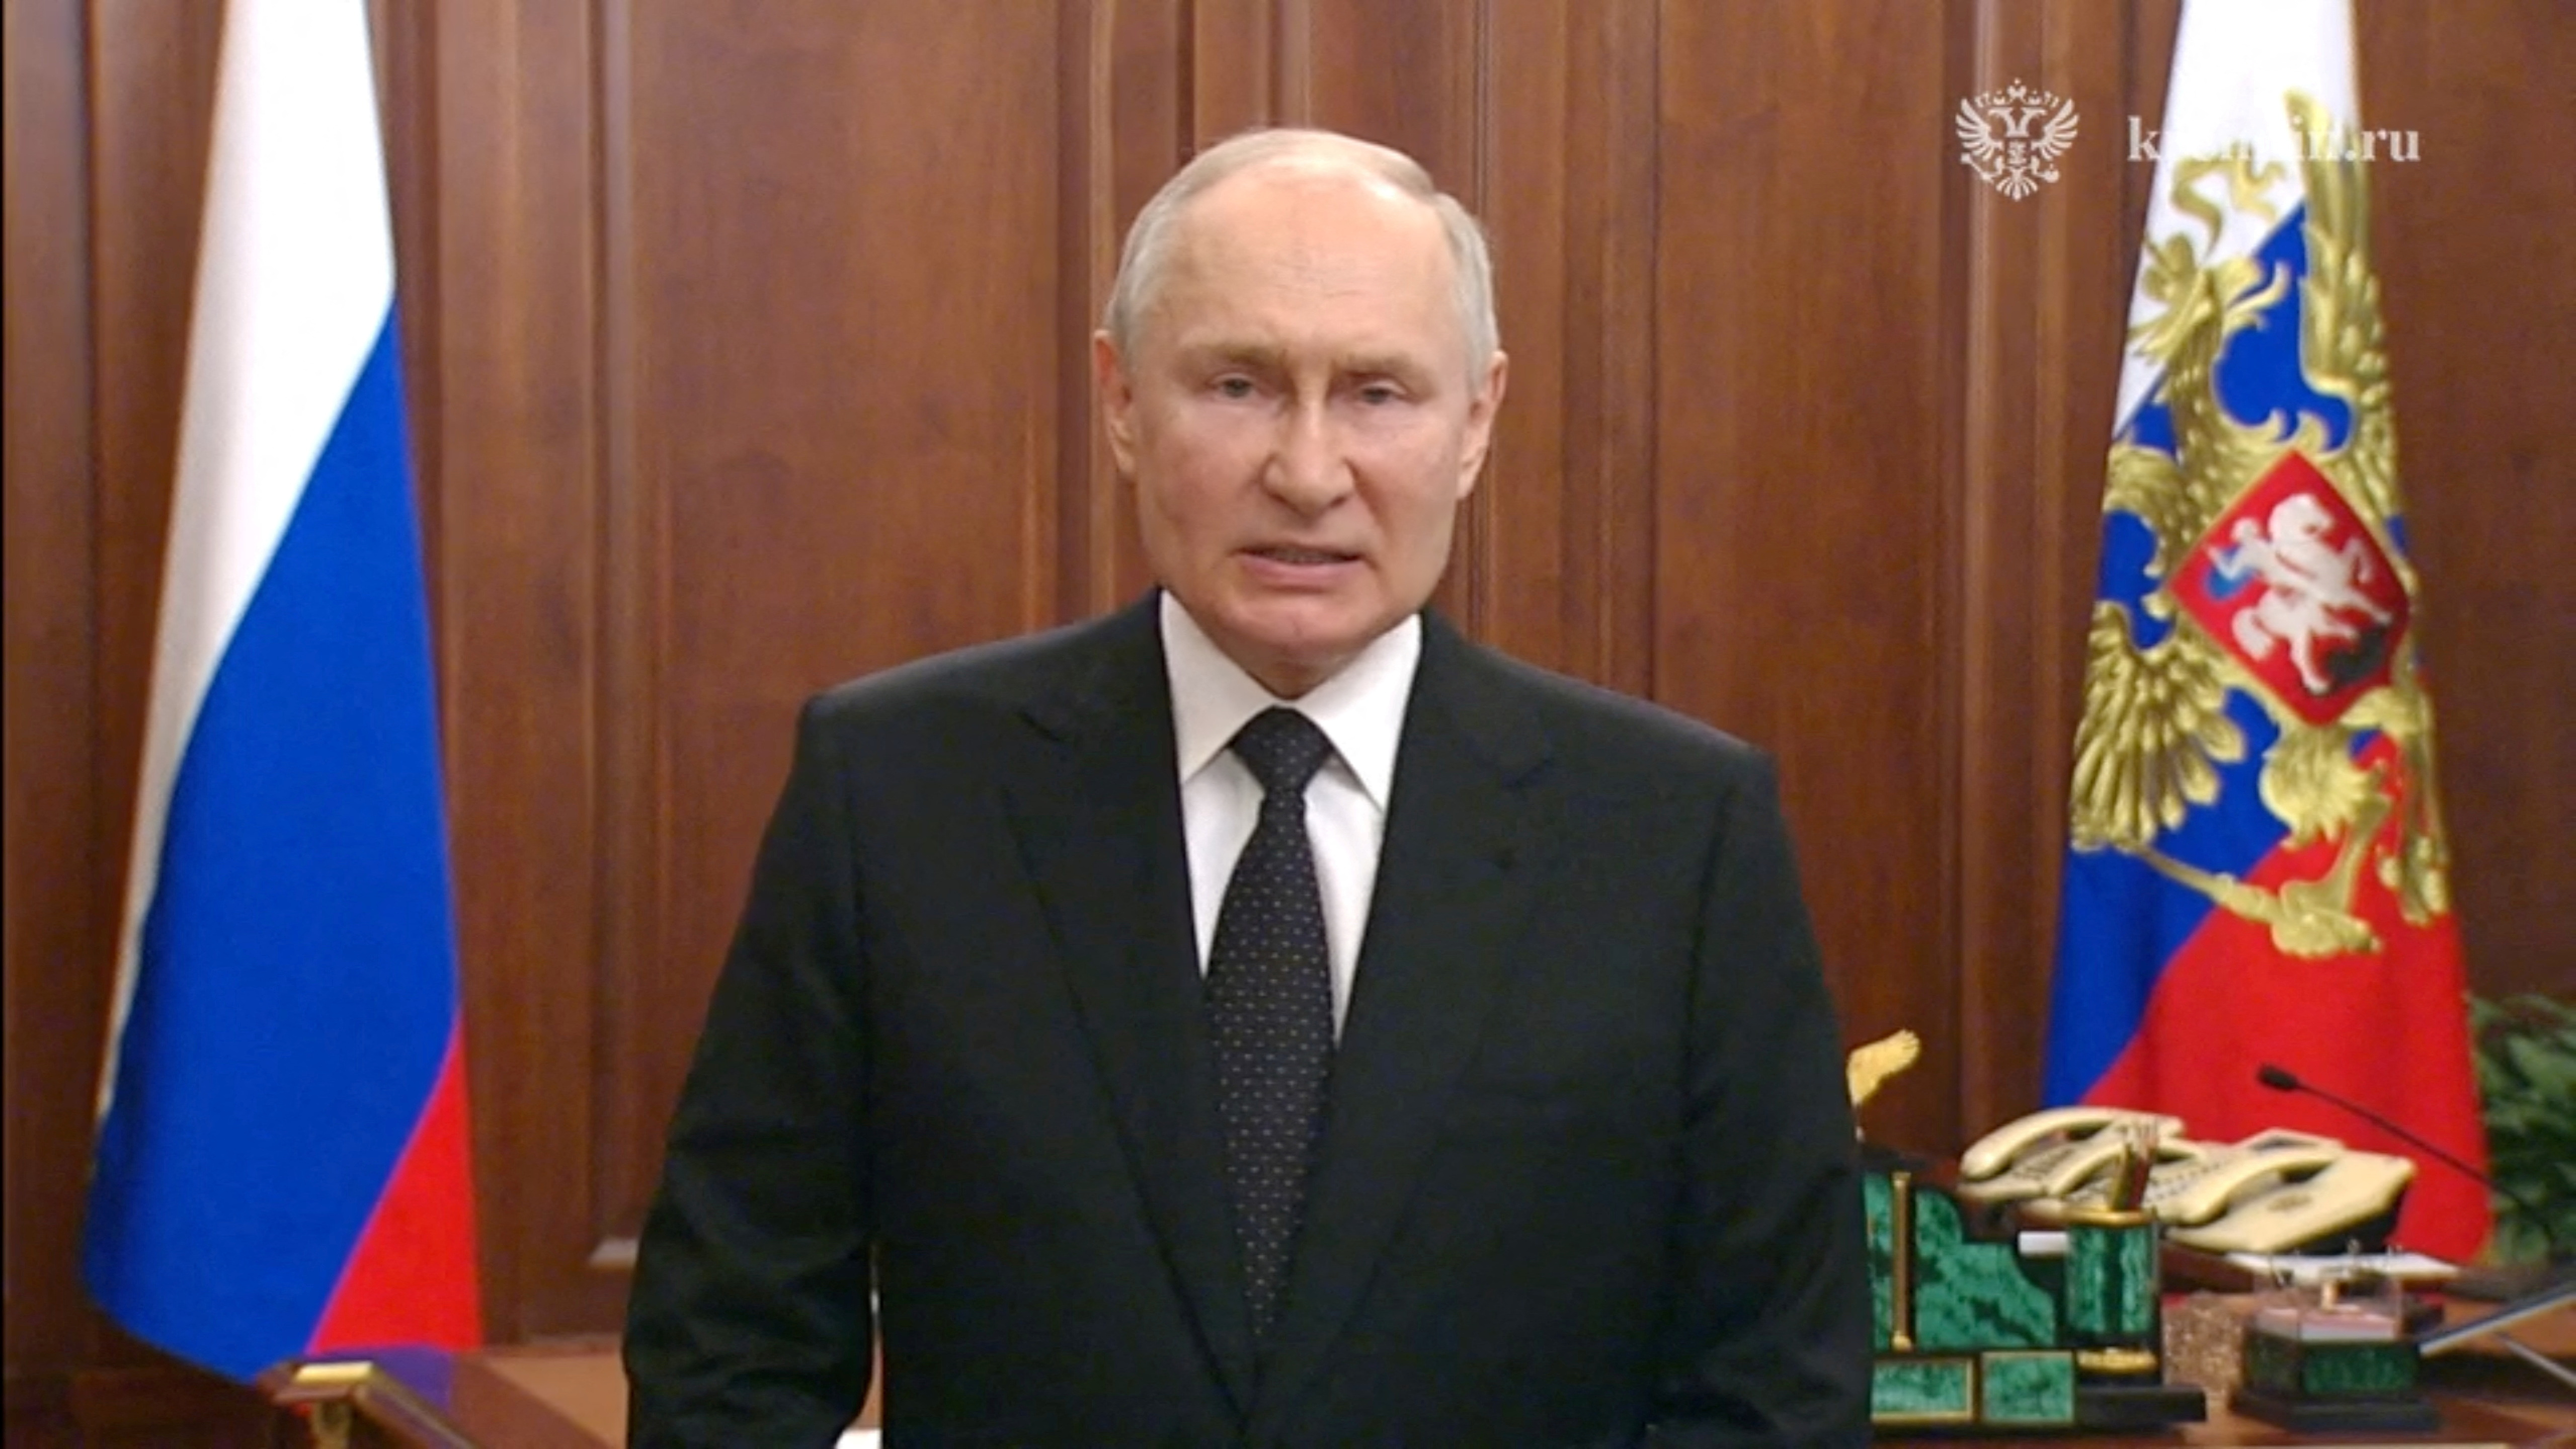 Vladimir Putin giving an emergency televised address in Moscow on Saturday over the Wagner rebellion. Kremlin.ru/ Reuters